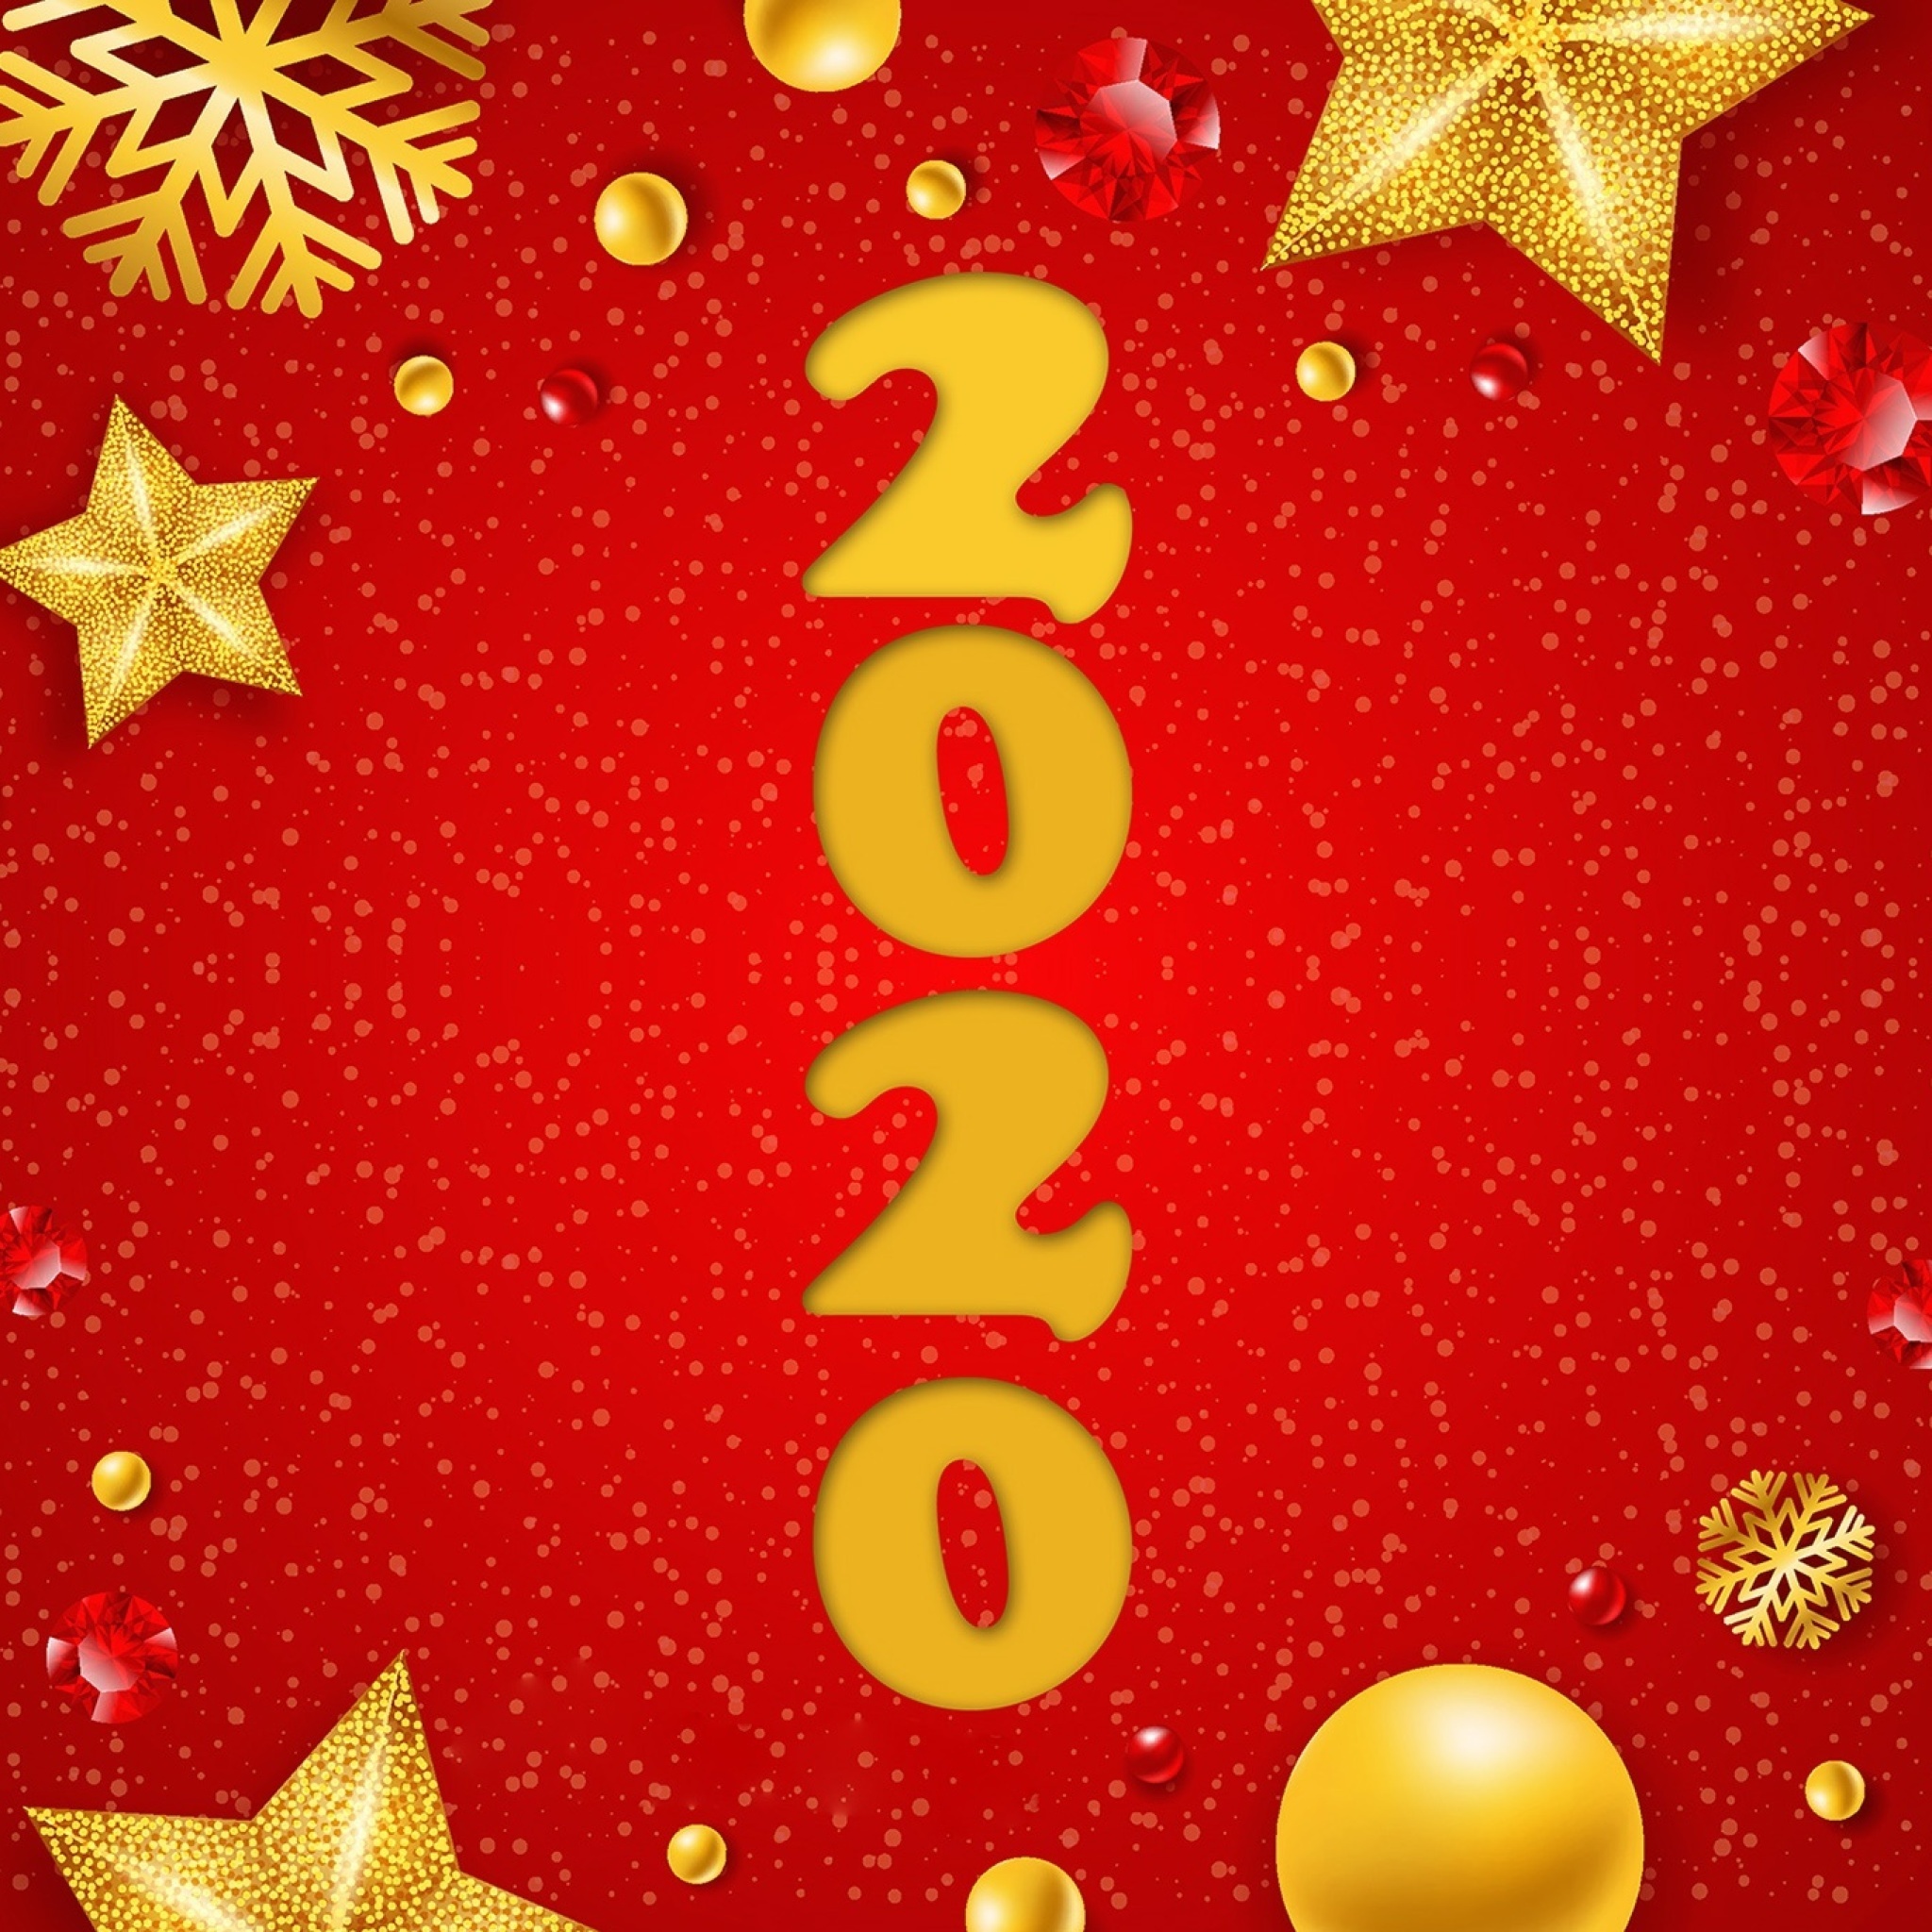 Happy New Year 2020 Messages wallpaper 2048x2048